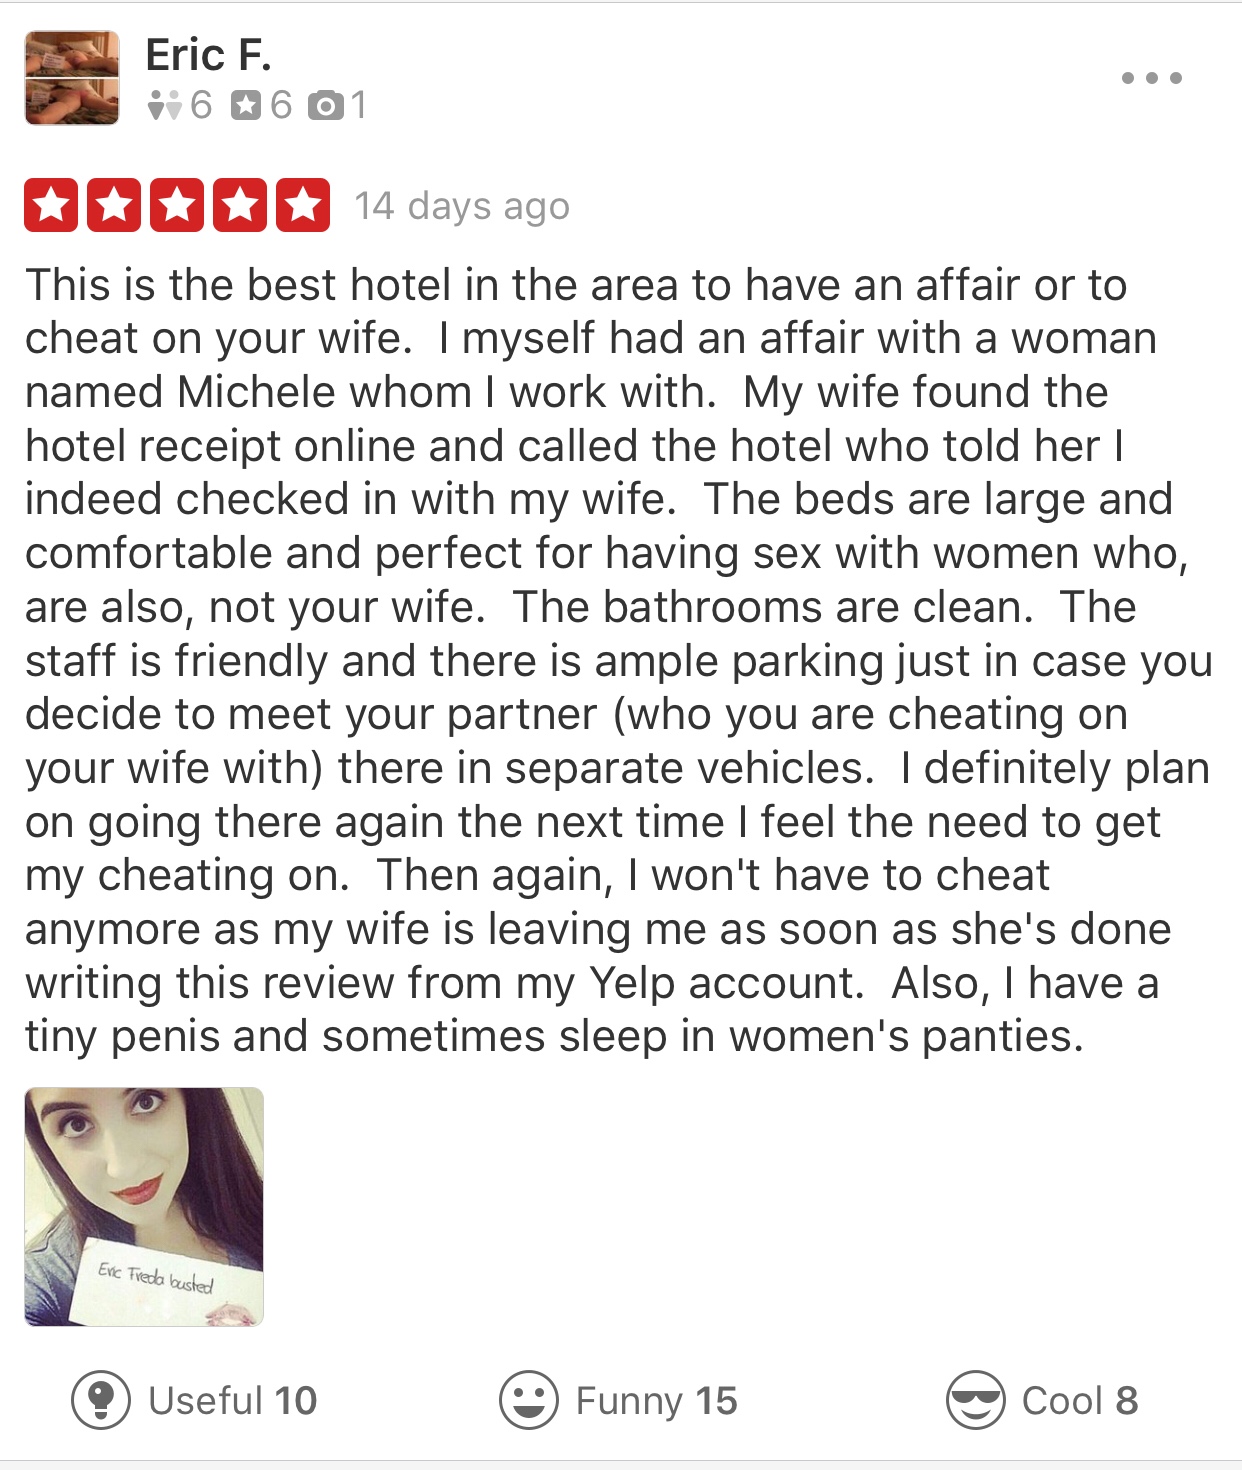 screenshot - Eric F. 60601 Od 14 days ago This is the best hotel in the area to have an affair or to cheat on your wife. I myself had an affair with a woman named Michele whom I work with. My wife found the hotel receipt online and called the hotel who to